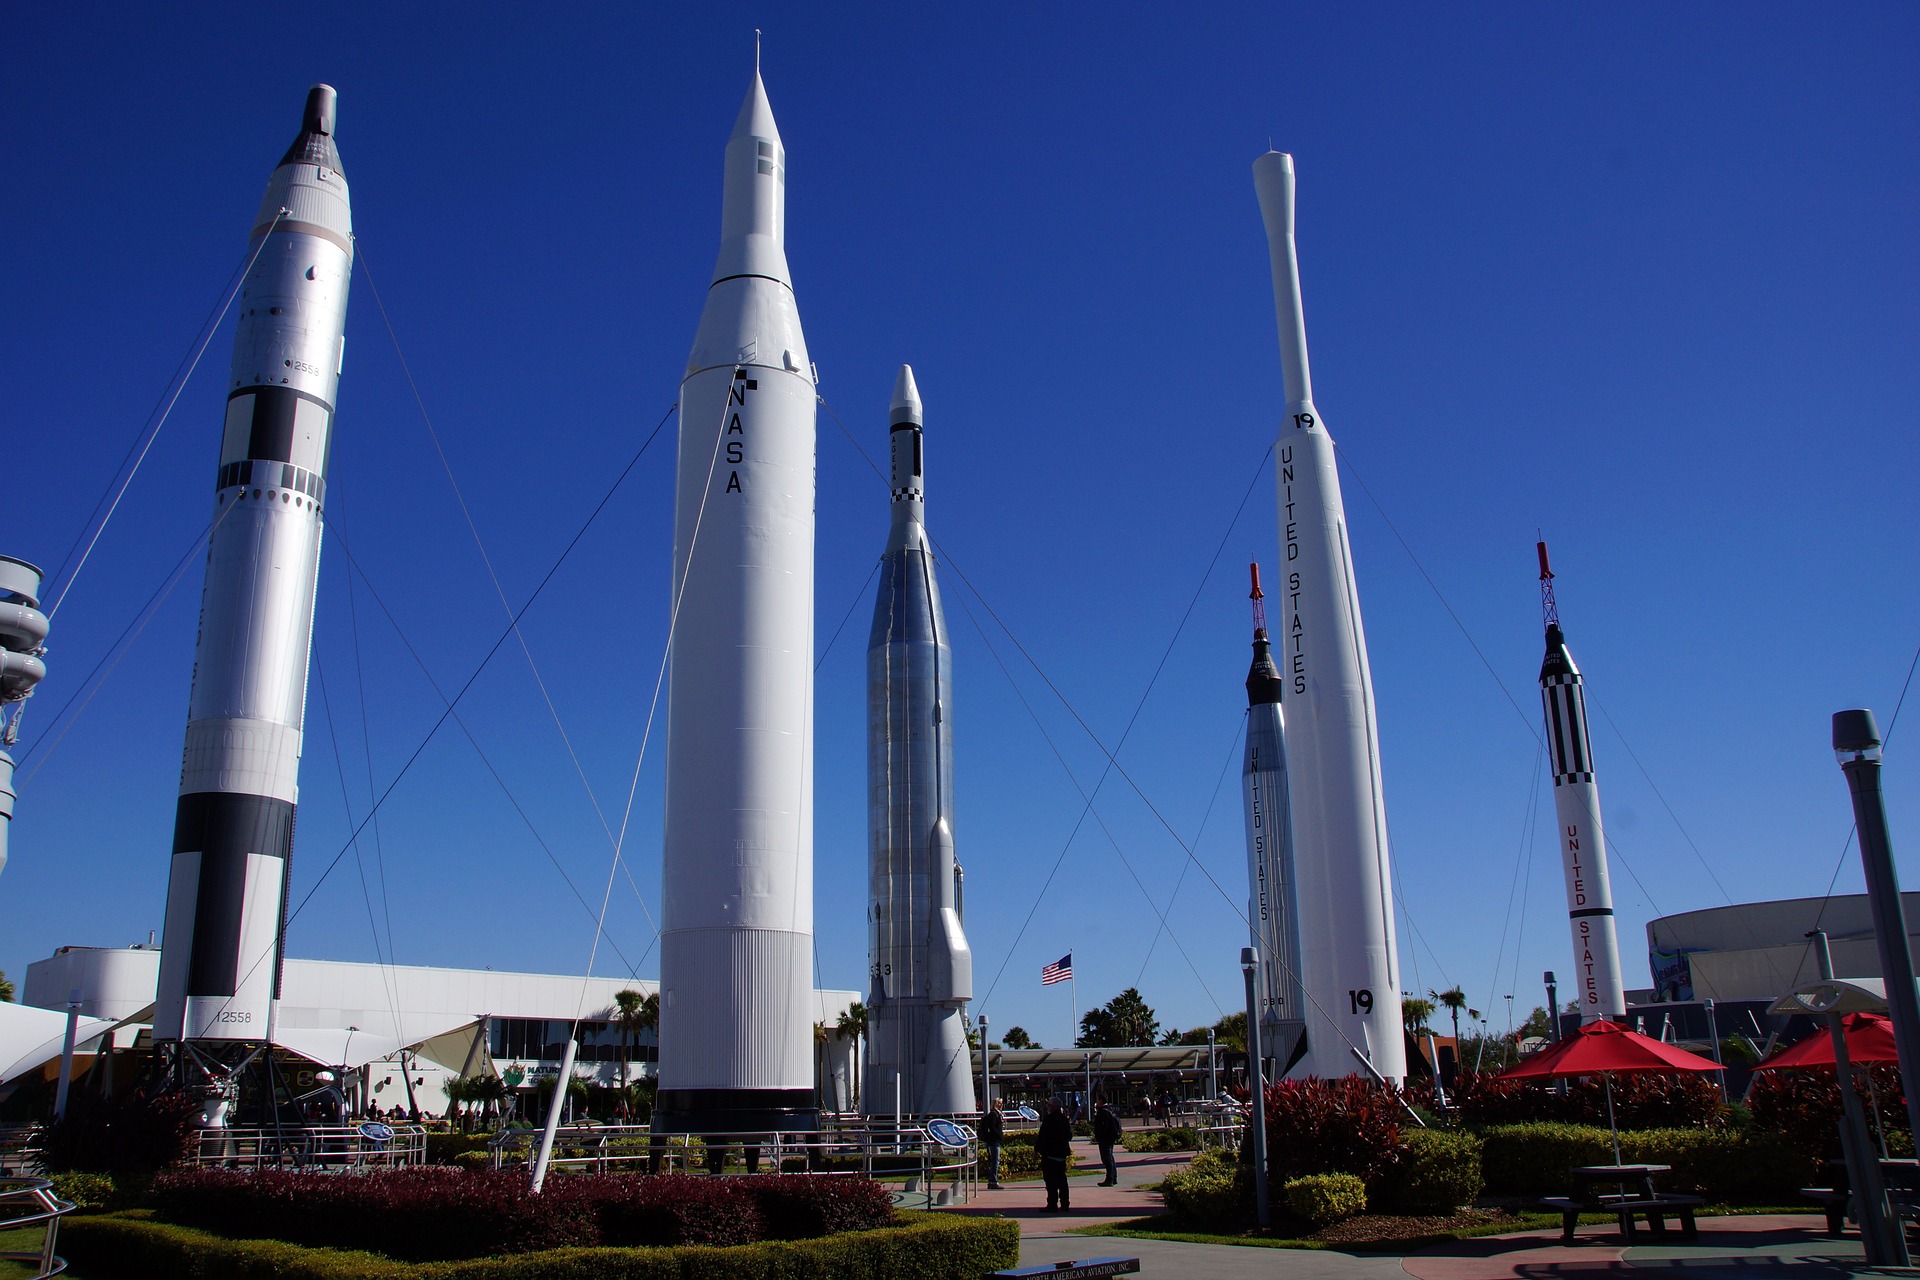 cape-canaveral-992547_1920.jpg